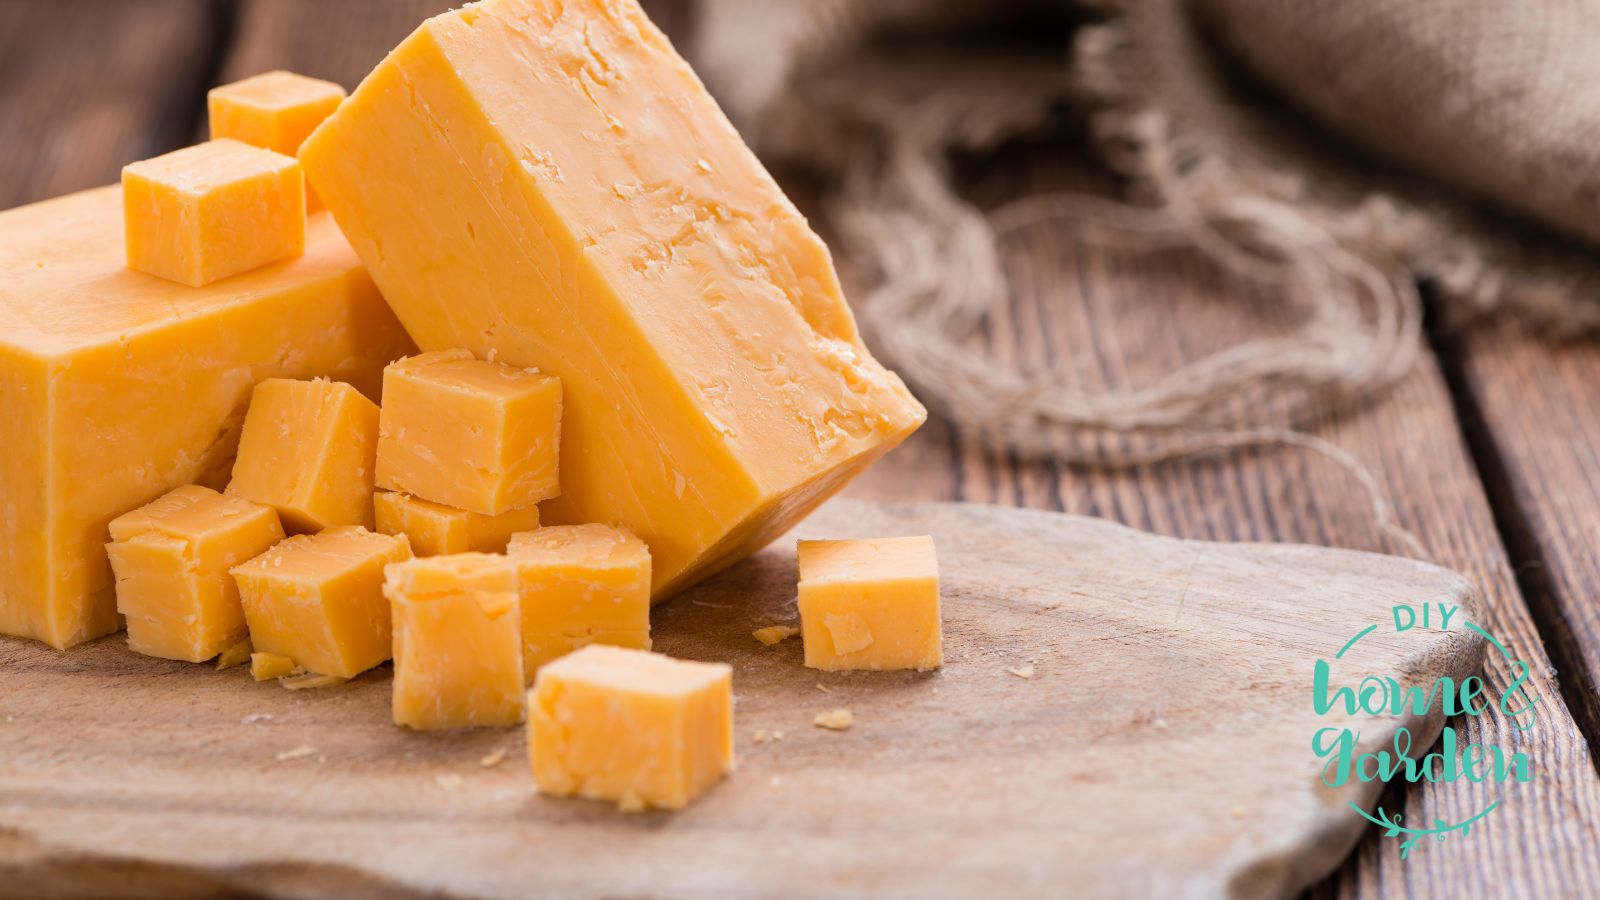 Types of Cheddar Cheese (Every Home Cook Should Know These!)